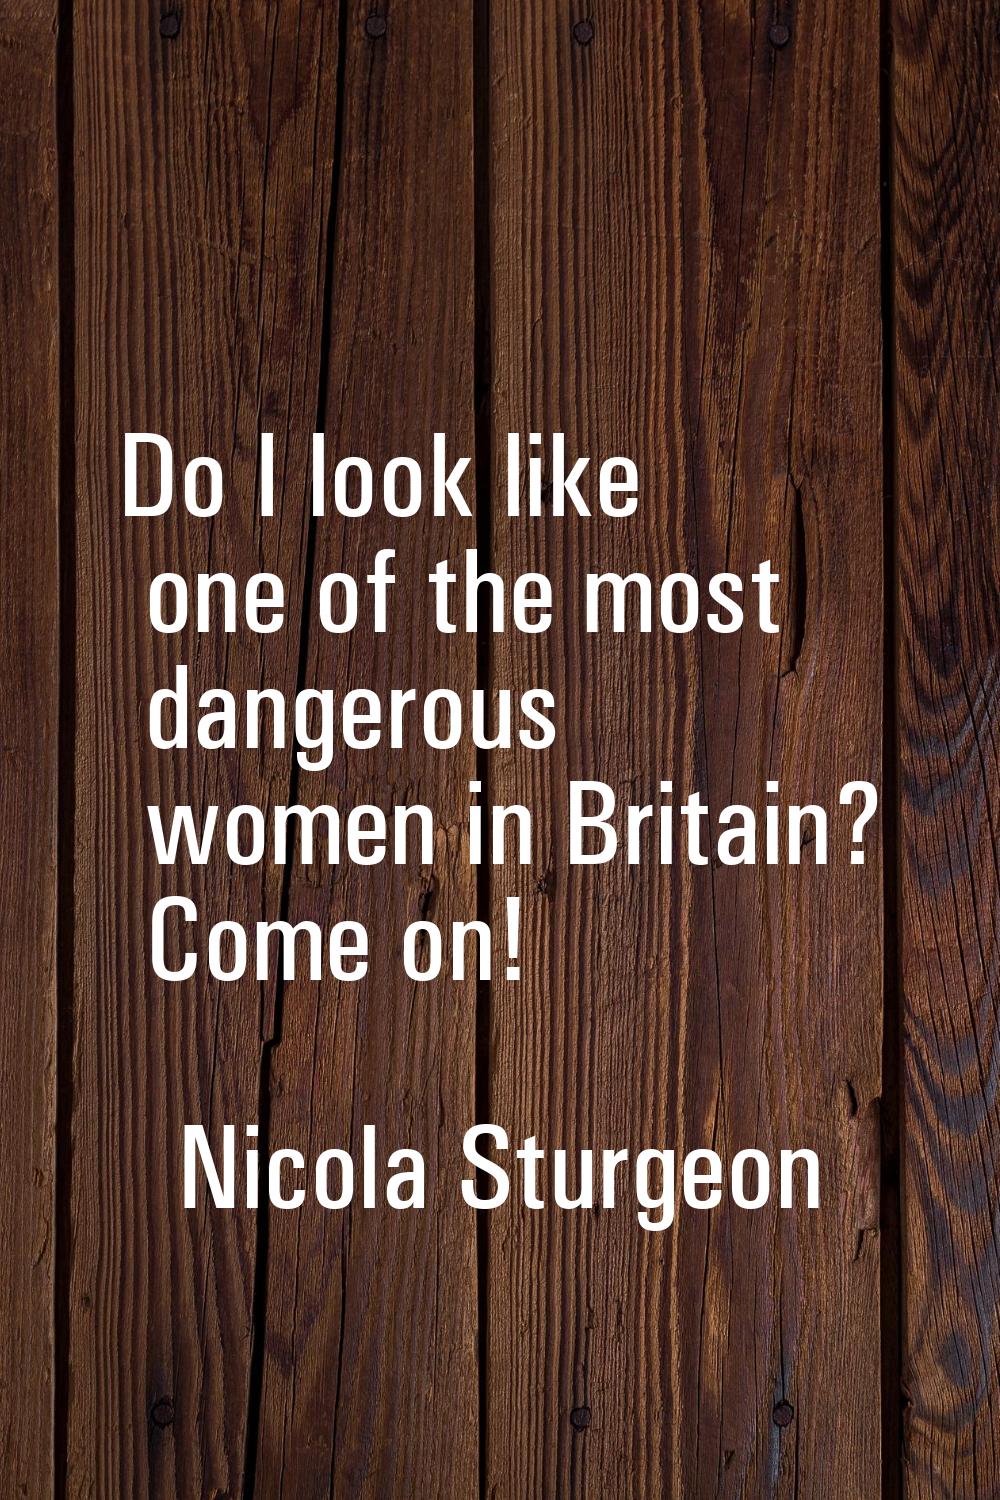 Do I look like one of the most dangerous women in Britain? Come on!